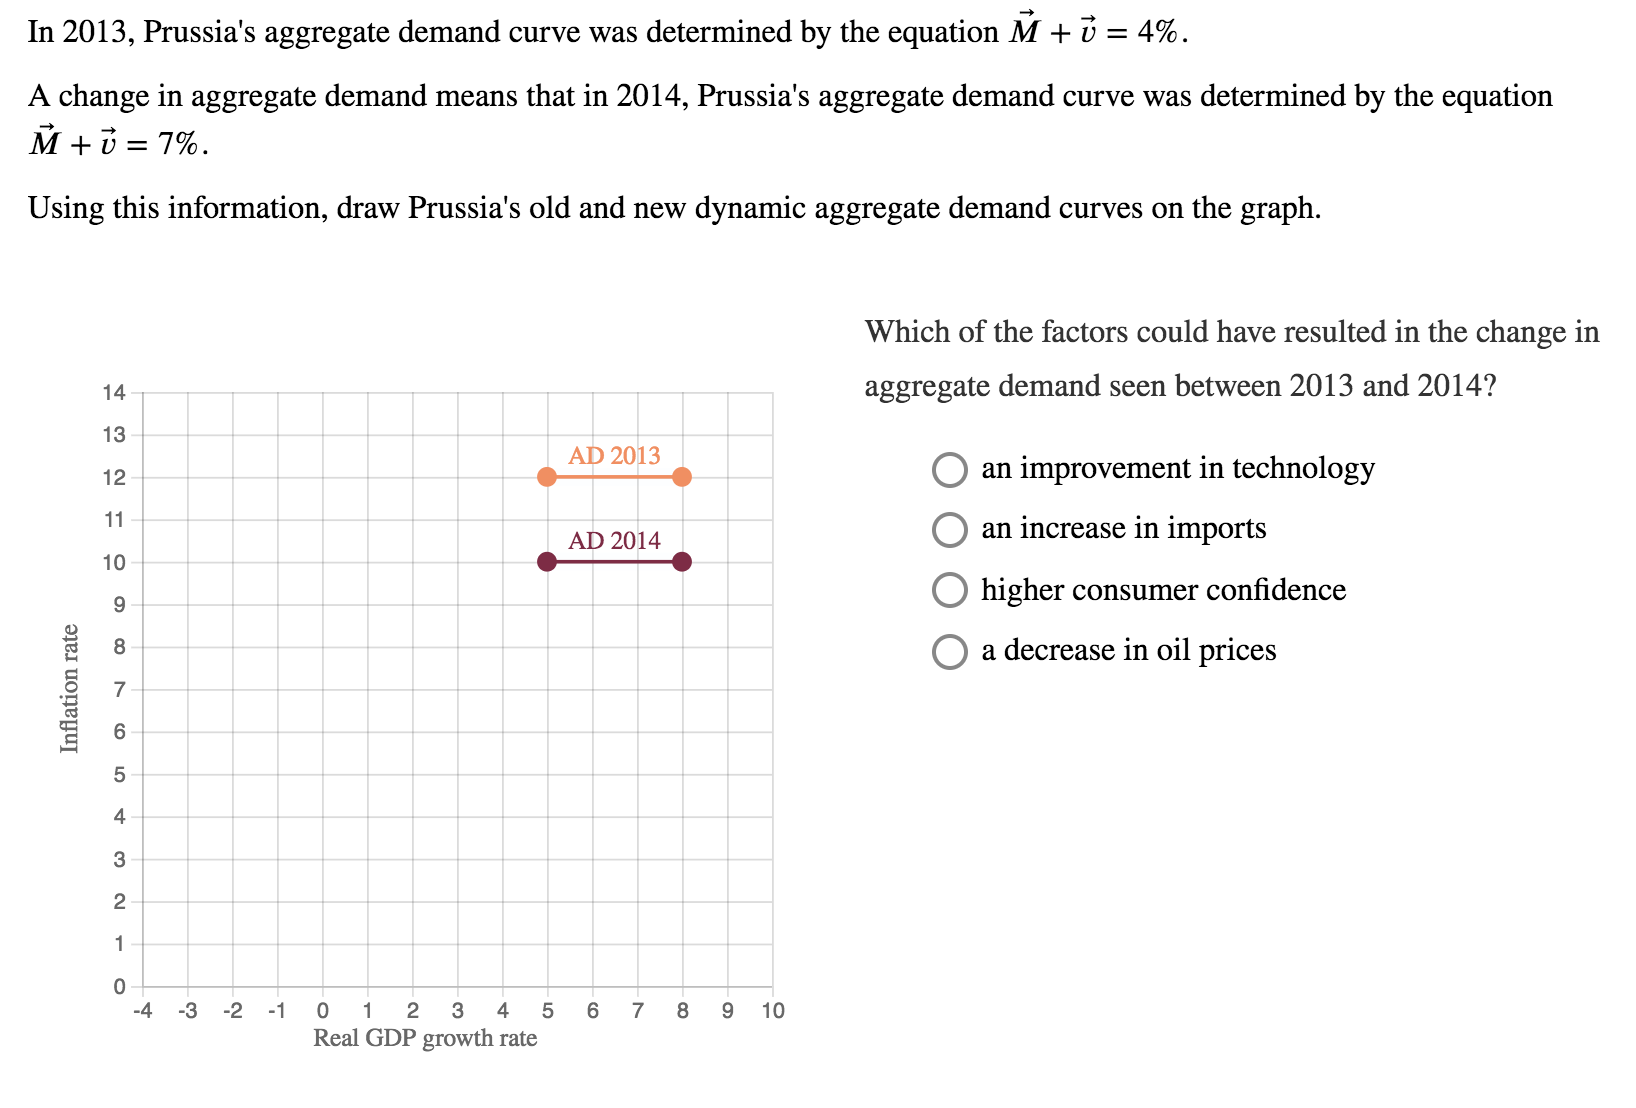 In 2013, Prussia's aggregate demand curve was determined by the equation M + 1-4%
A change in aggregate demand means that in 2014, Prussia's aggregate demand curve was determined by the equation
Using this information, draw Prussia's old and new dynamic aggregate demand curves on the graph
Which of the factors could have resulted in the change irn
aggregate demand seen between 2013 and 2014?
13
AD 2013
an improvement in technology
O an increase in imports
O higher consumer confidence
O a decrease in oil prices
12
AD 2014
10
8
5
4
3
2
4 -3 2 1 0 1 2 3 4 5 6 78 9 10
Real GDP growth rate
